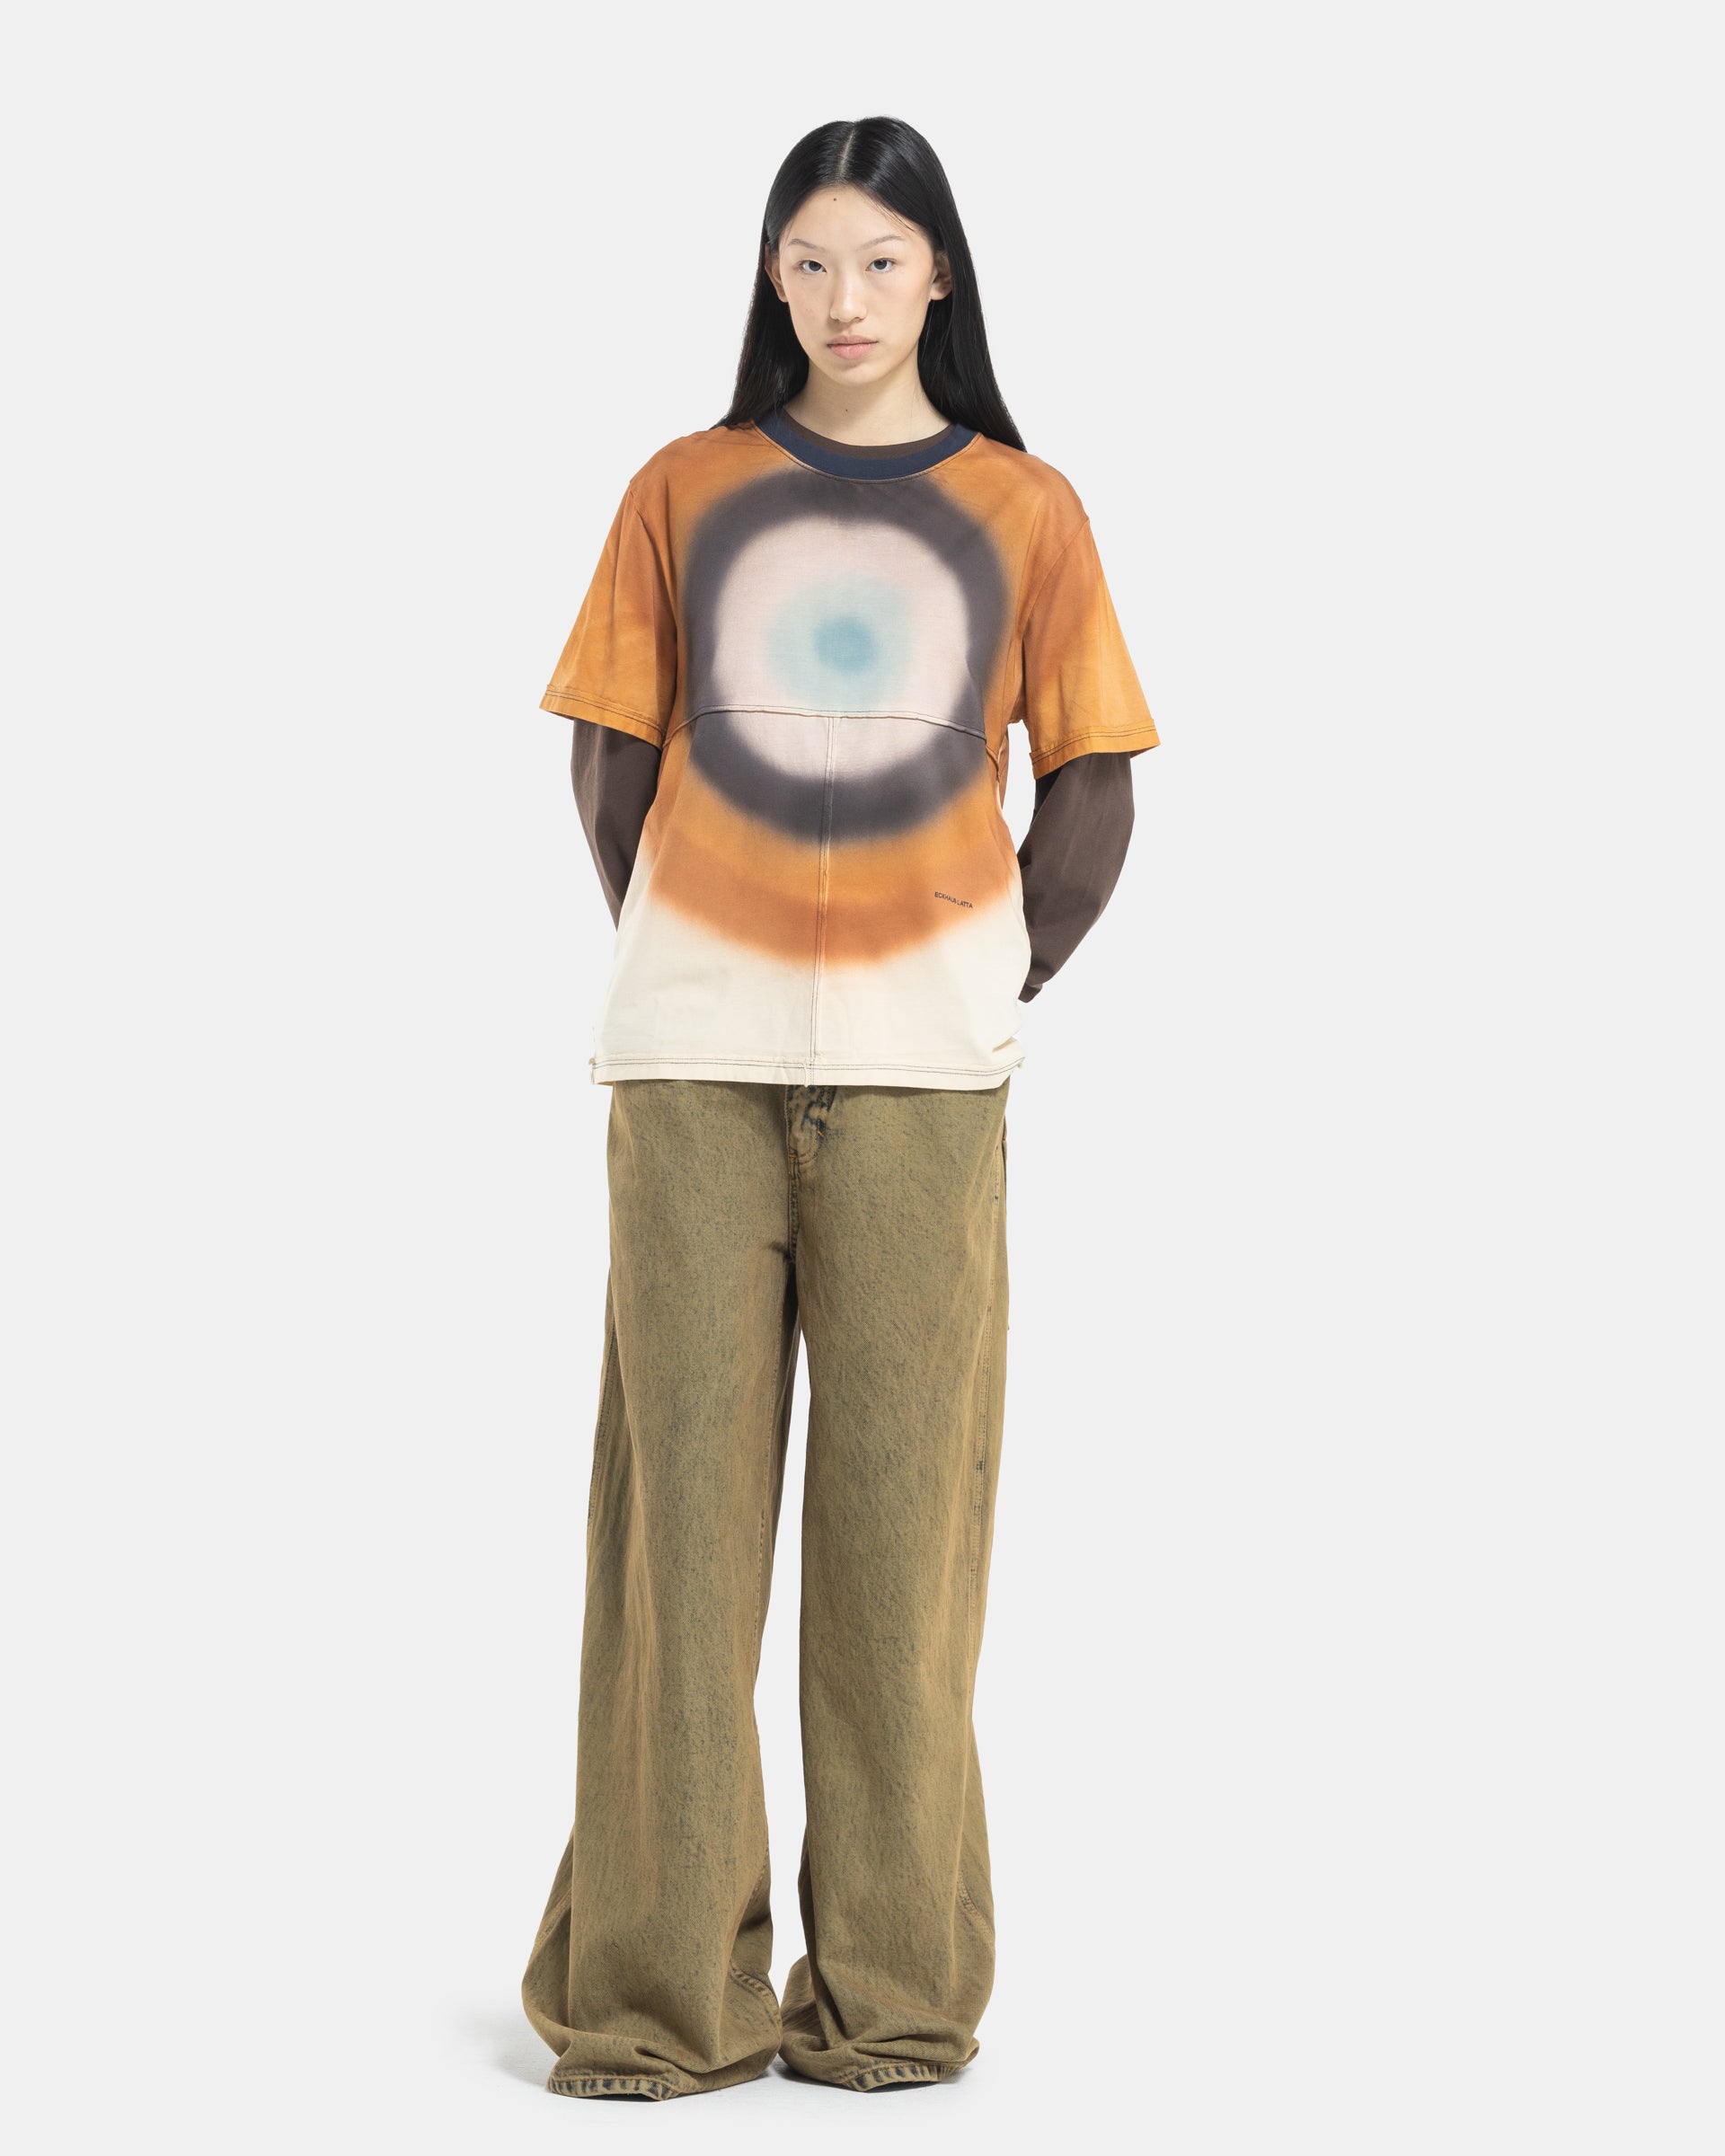 Female Model wearing the Eckhaus Latta Lapped Designer T-Shirt with a printed design